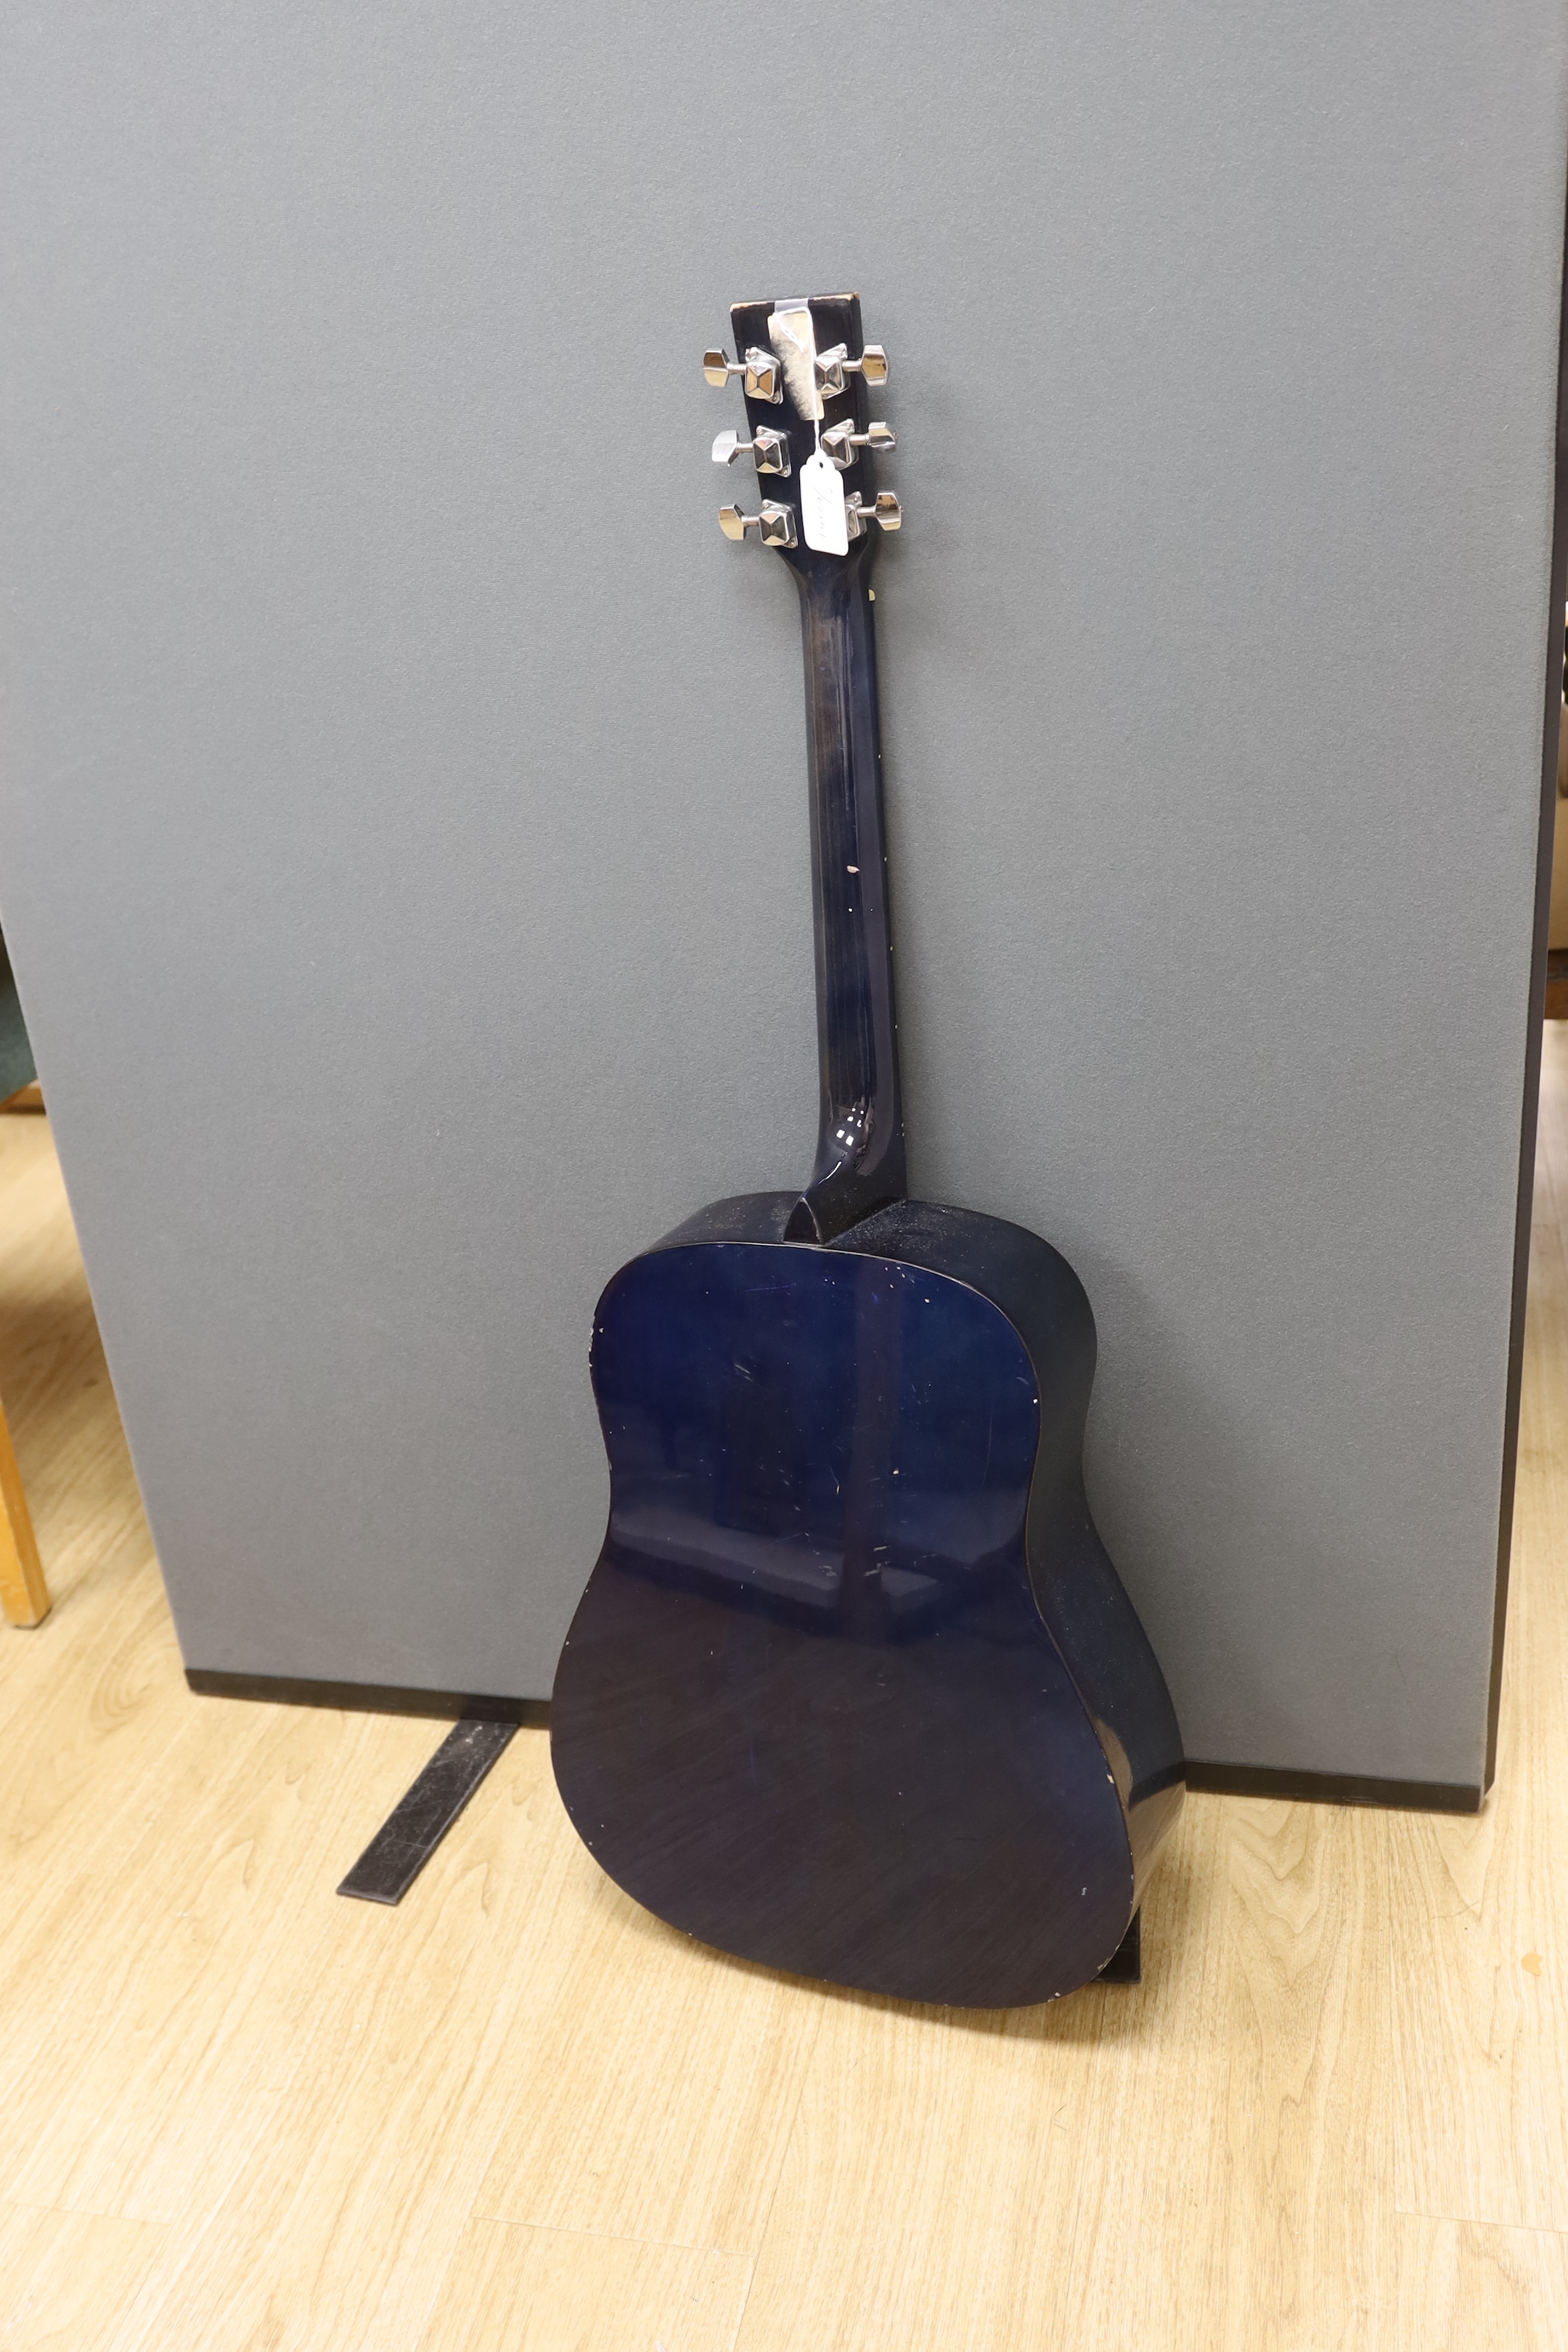 A Martin Smith electro-acoustic guitar in a Ritter soft case